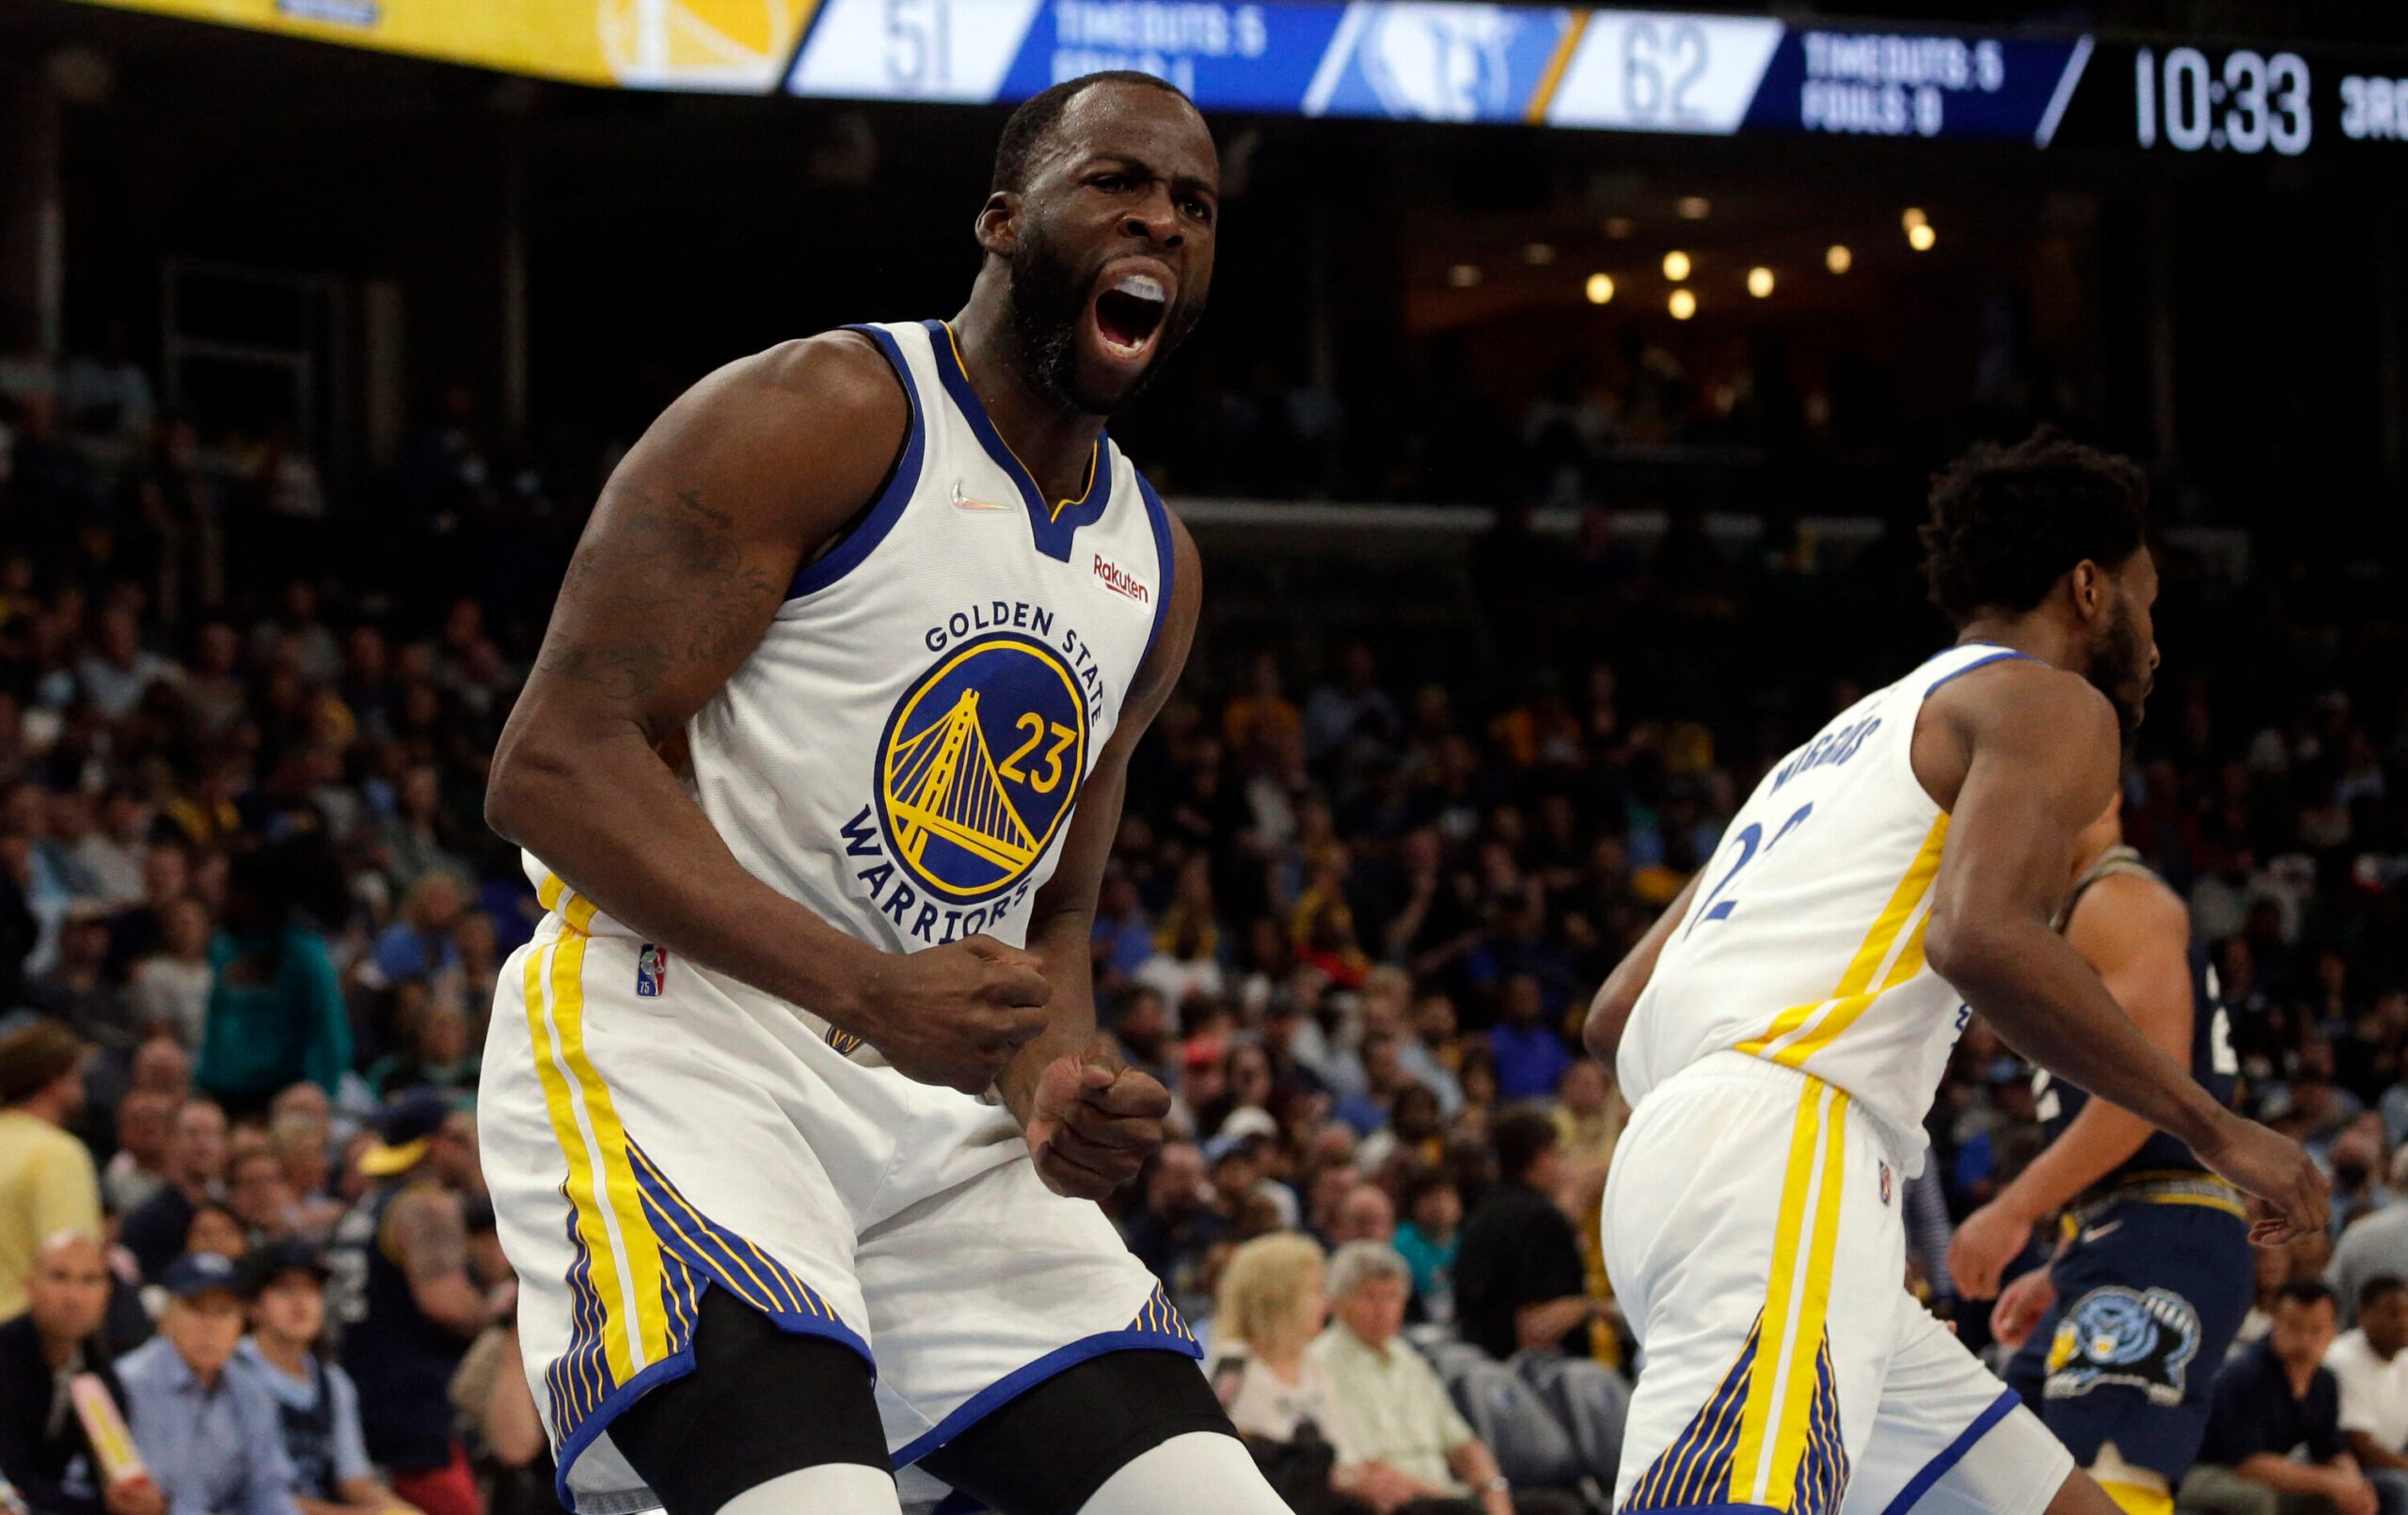 Draymond Green slapped with $25,000 fine for flipping off Grizzlies fans